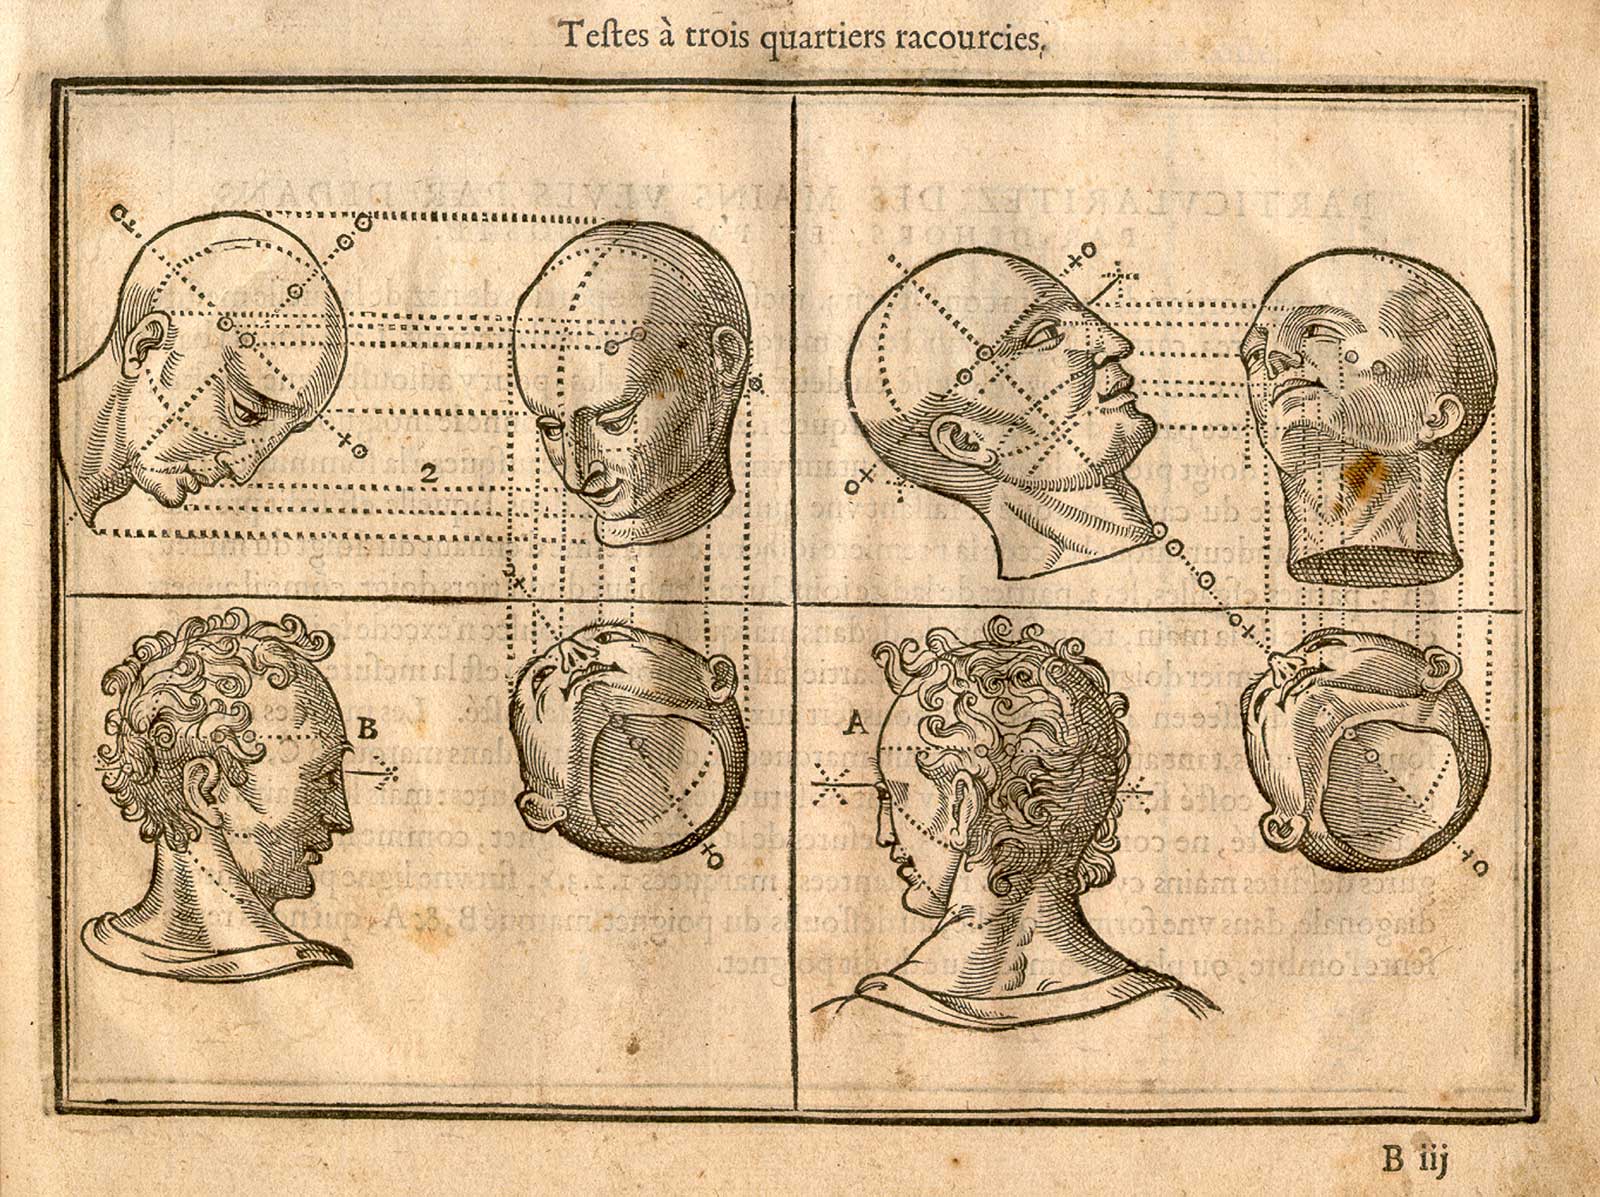 Woodcut illustration showing eight male heads from different positions: from the upper left, a bald head looking to the right viewed in profile looking downward, a bald head looking to the left viewed from slightly above, a bald head viewed in profile looking upward, a bald head viewed from the front looking upward and to the left; on the lower half of the page, a male head with hair looking to the right and mostly viewed from behind, a head viewed from below looking up and to the left, a head with hair looking to the left but mostly viewed from behind, and a head viewed from below looking up and to the left, from Jehan Cousin’s Livre de pourtraiture, NLM Call no.: WZ 250 C8673L 1608.